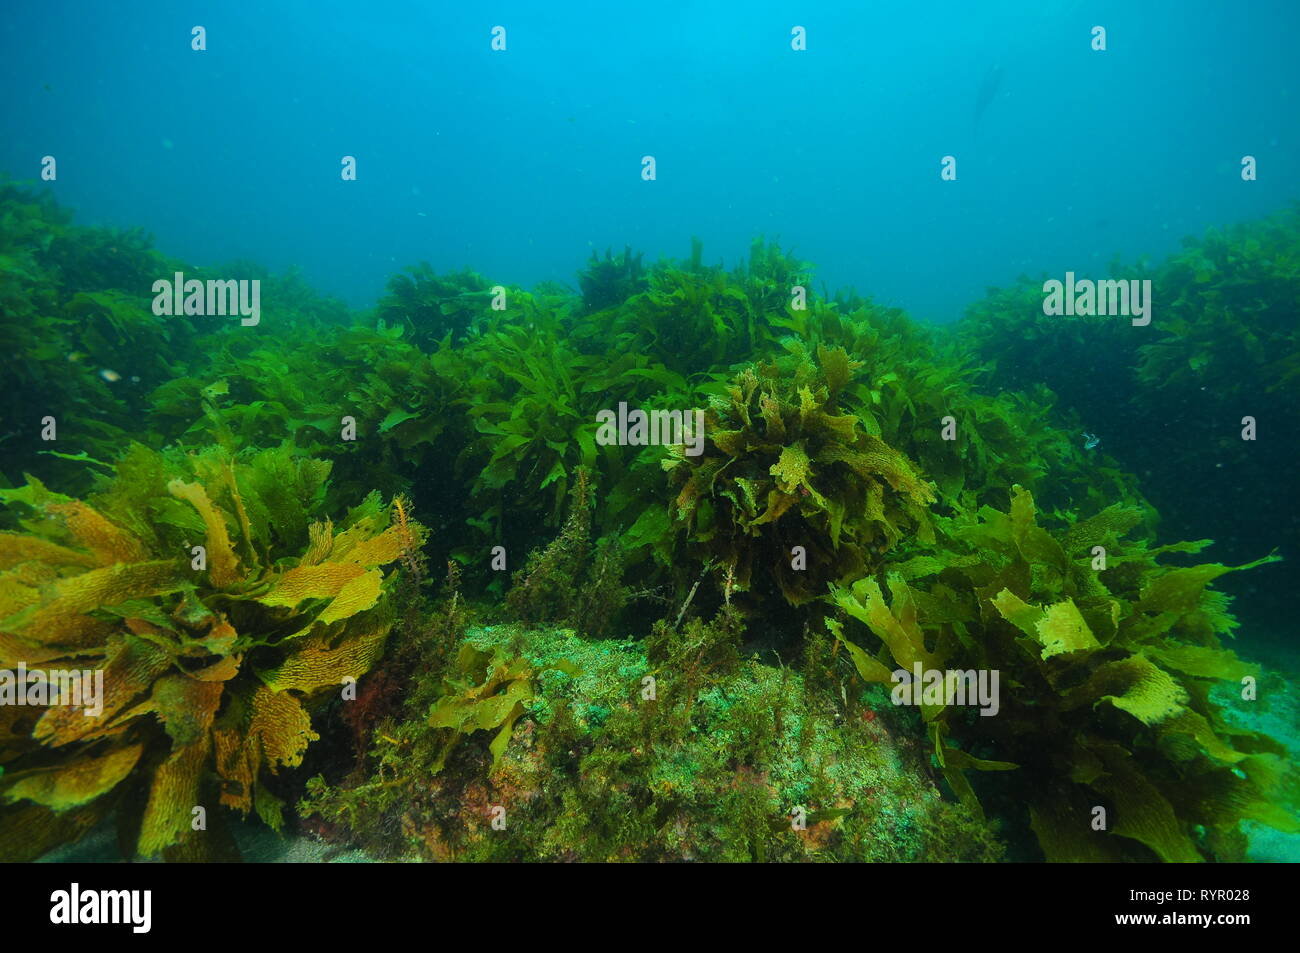 Flat rocky reef with areas of dense kelp forest and relatively barren surfaces covered with just scarce short algae. Stock Photo